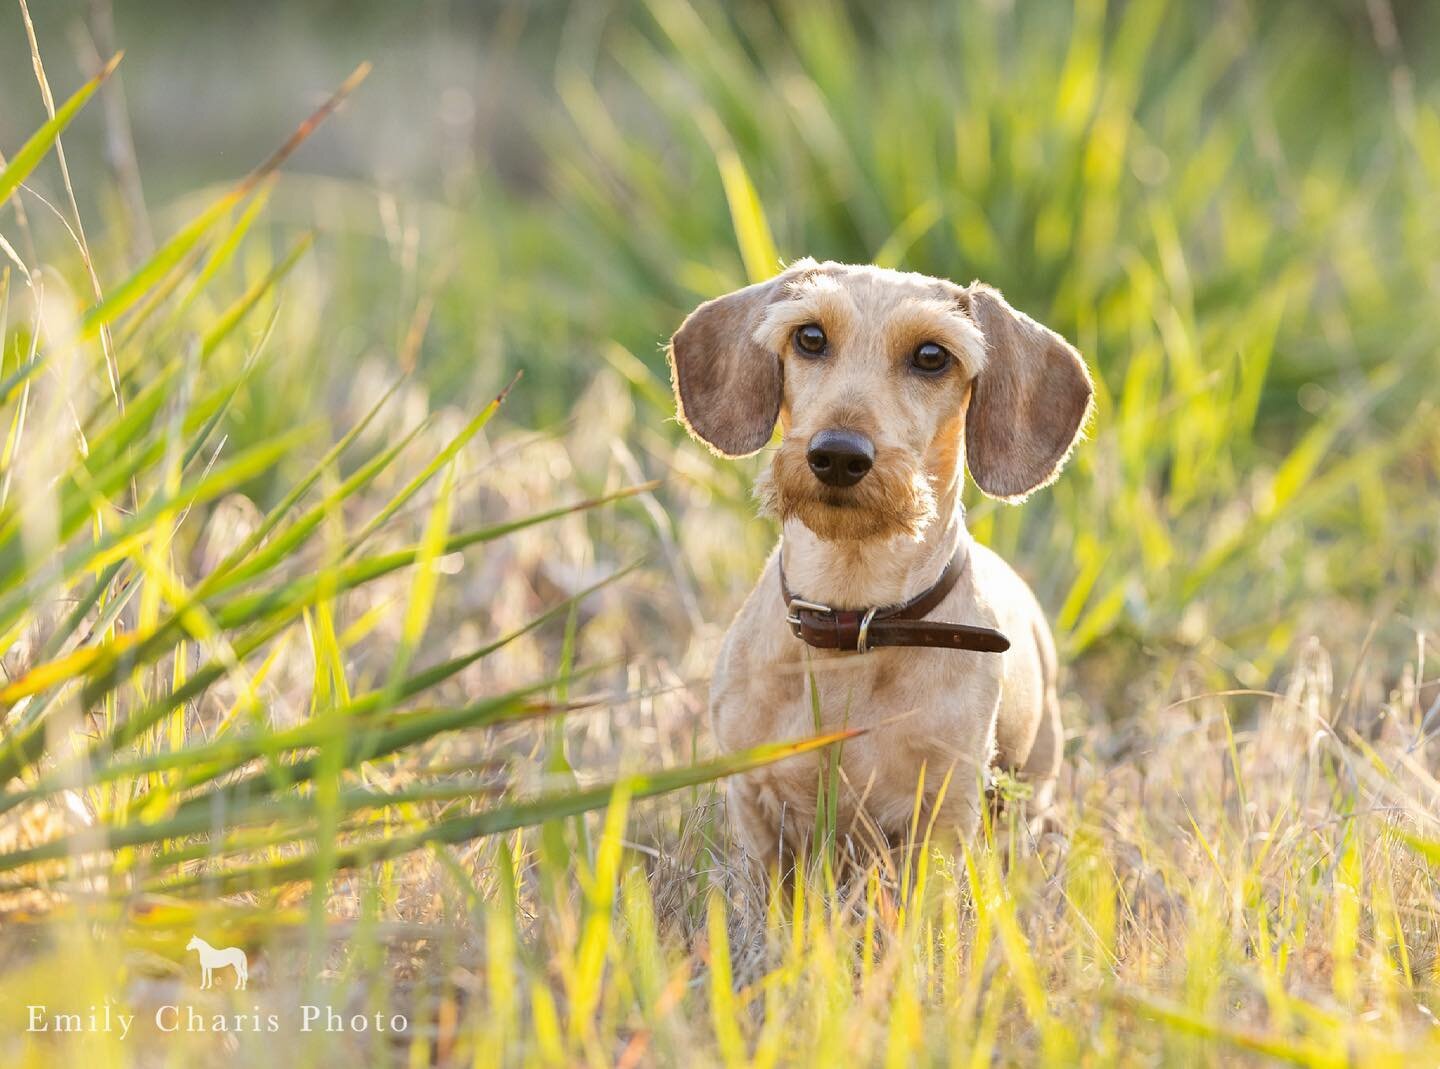 When you're only ankle high, but still know you're king of the jungle...especially with these eyebrows. -Flip The Mini Dachshund